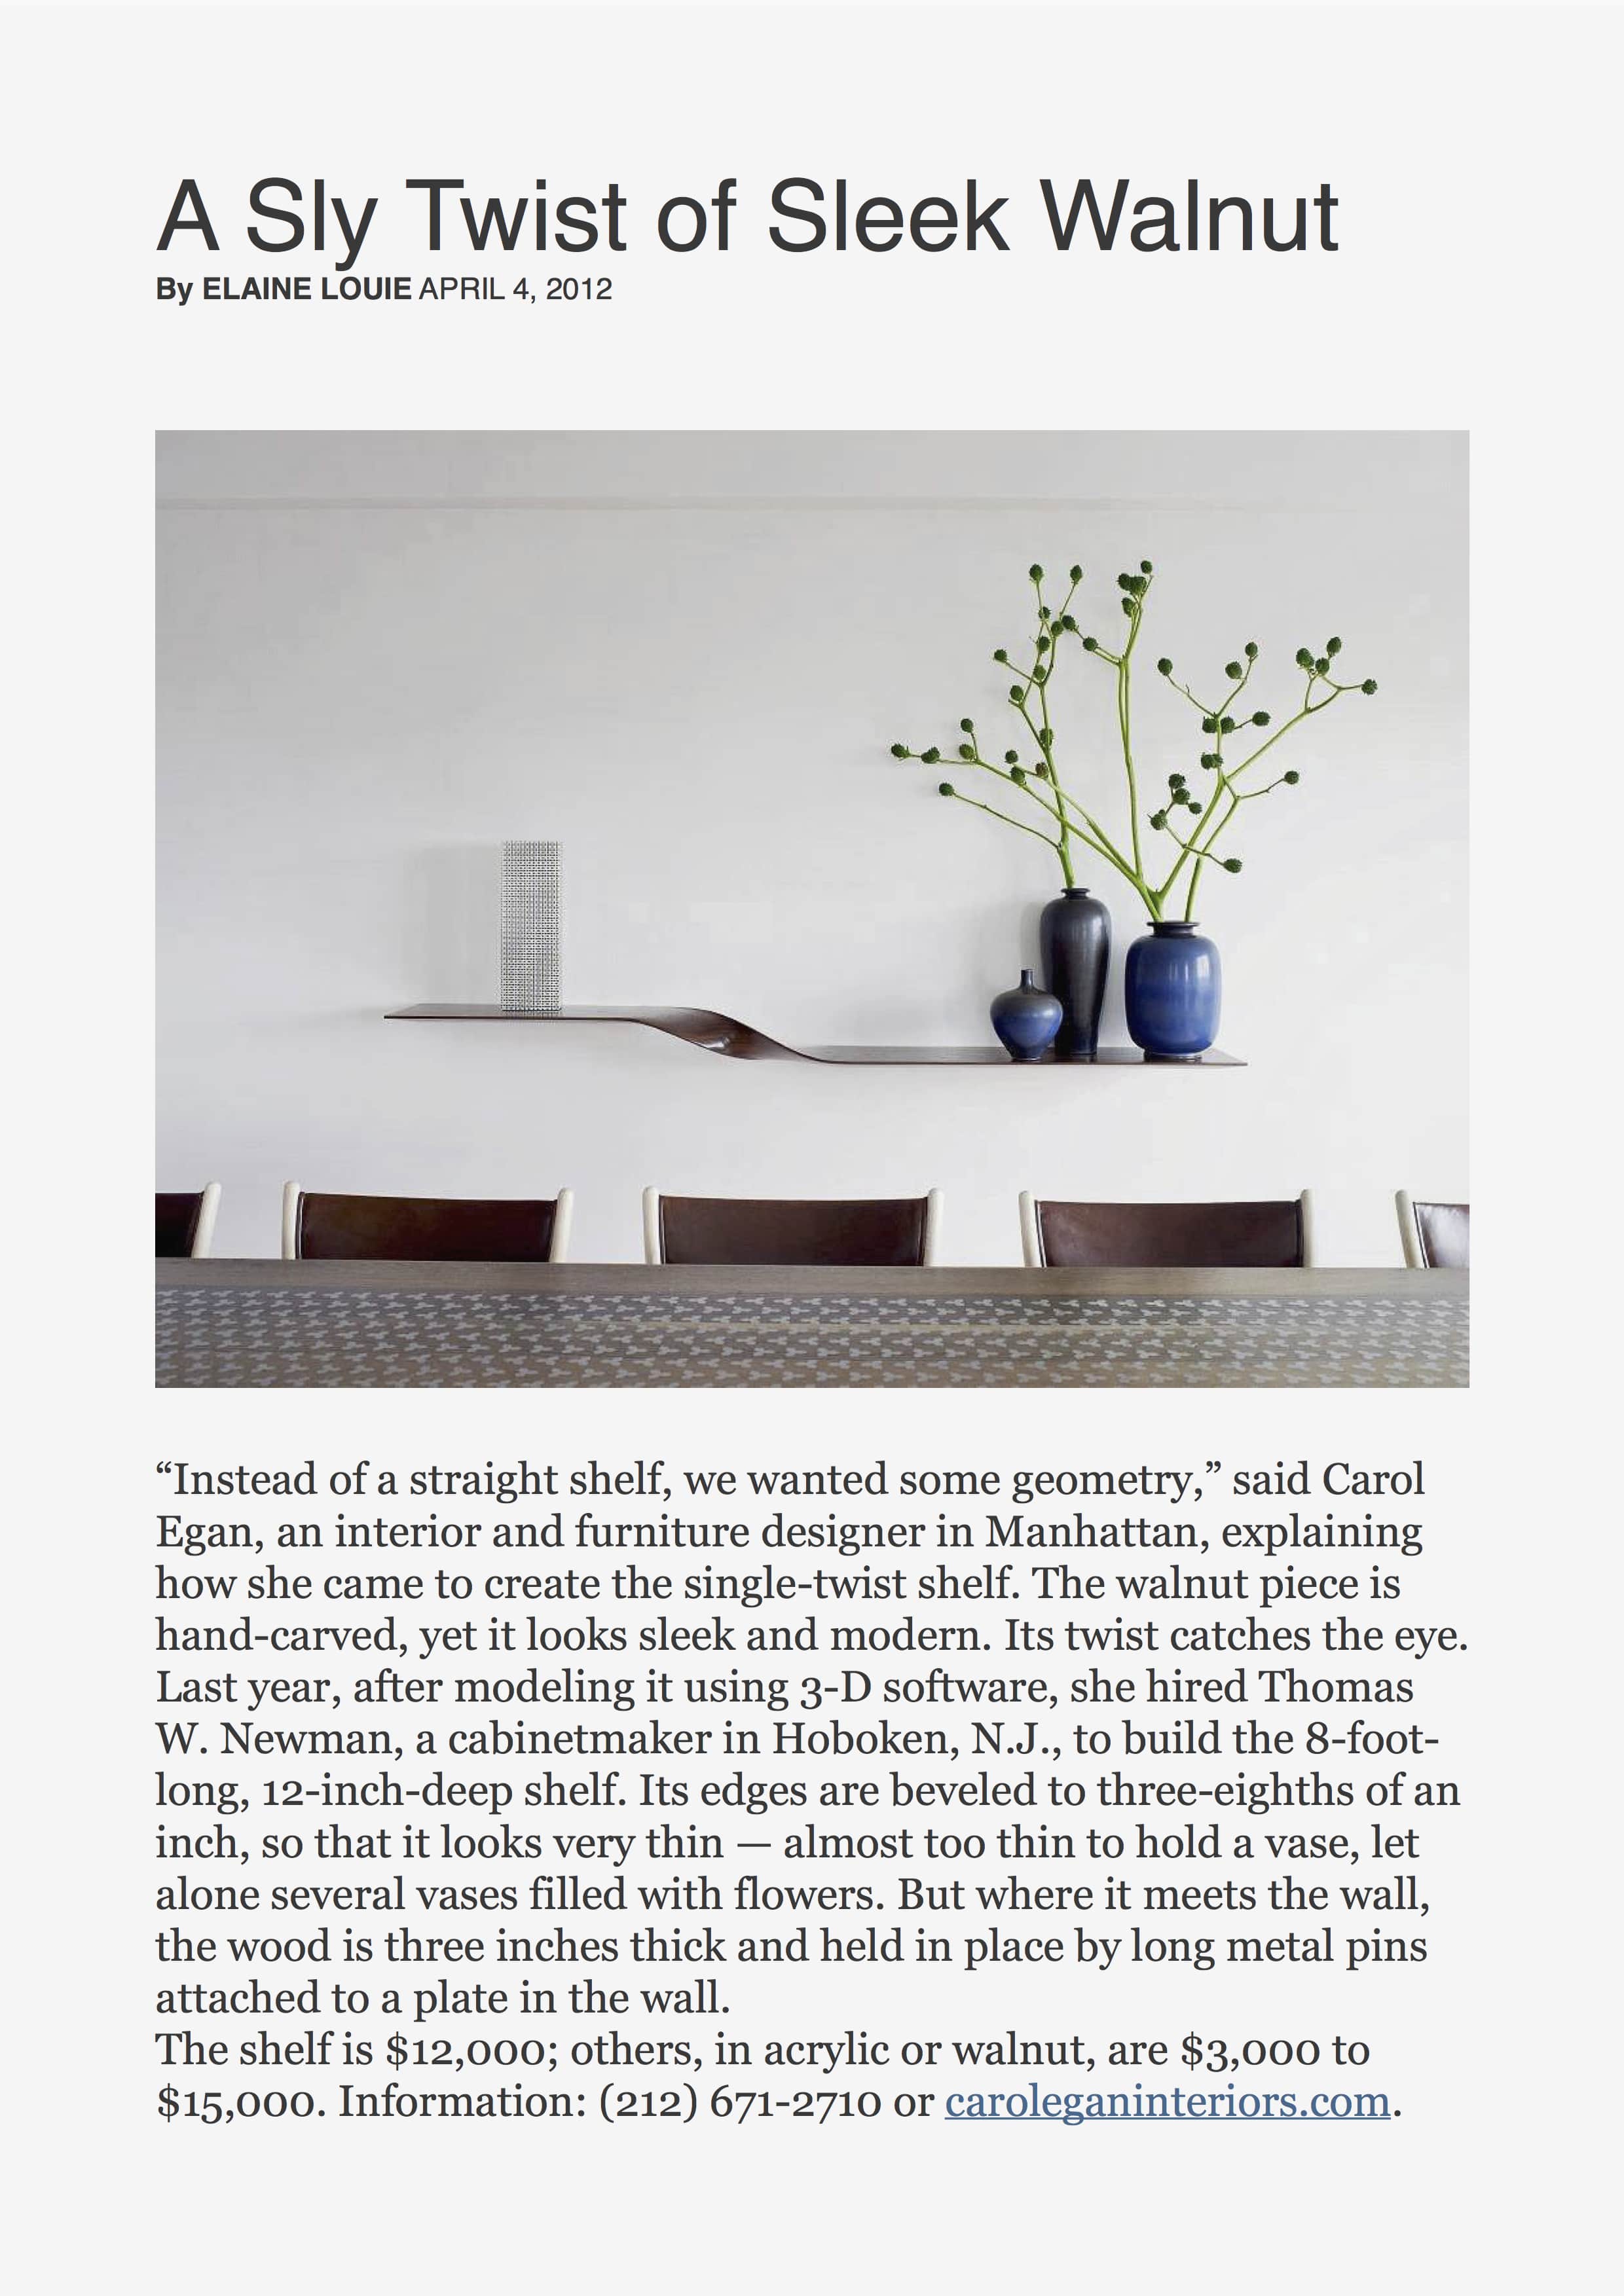 A photograph of the CE01 180 Twist Shelf walnut by Carol Egan featured in April 2012 of New York Times.